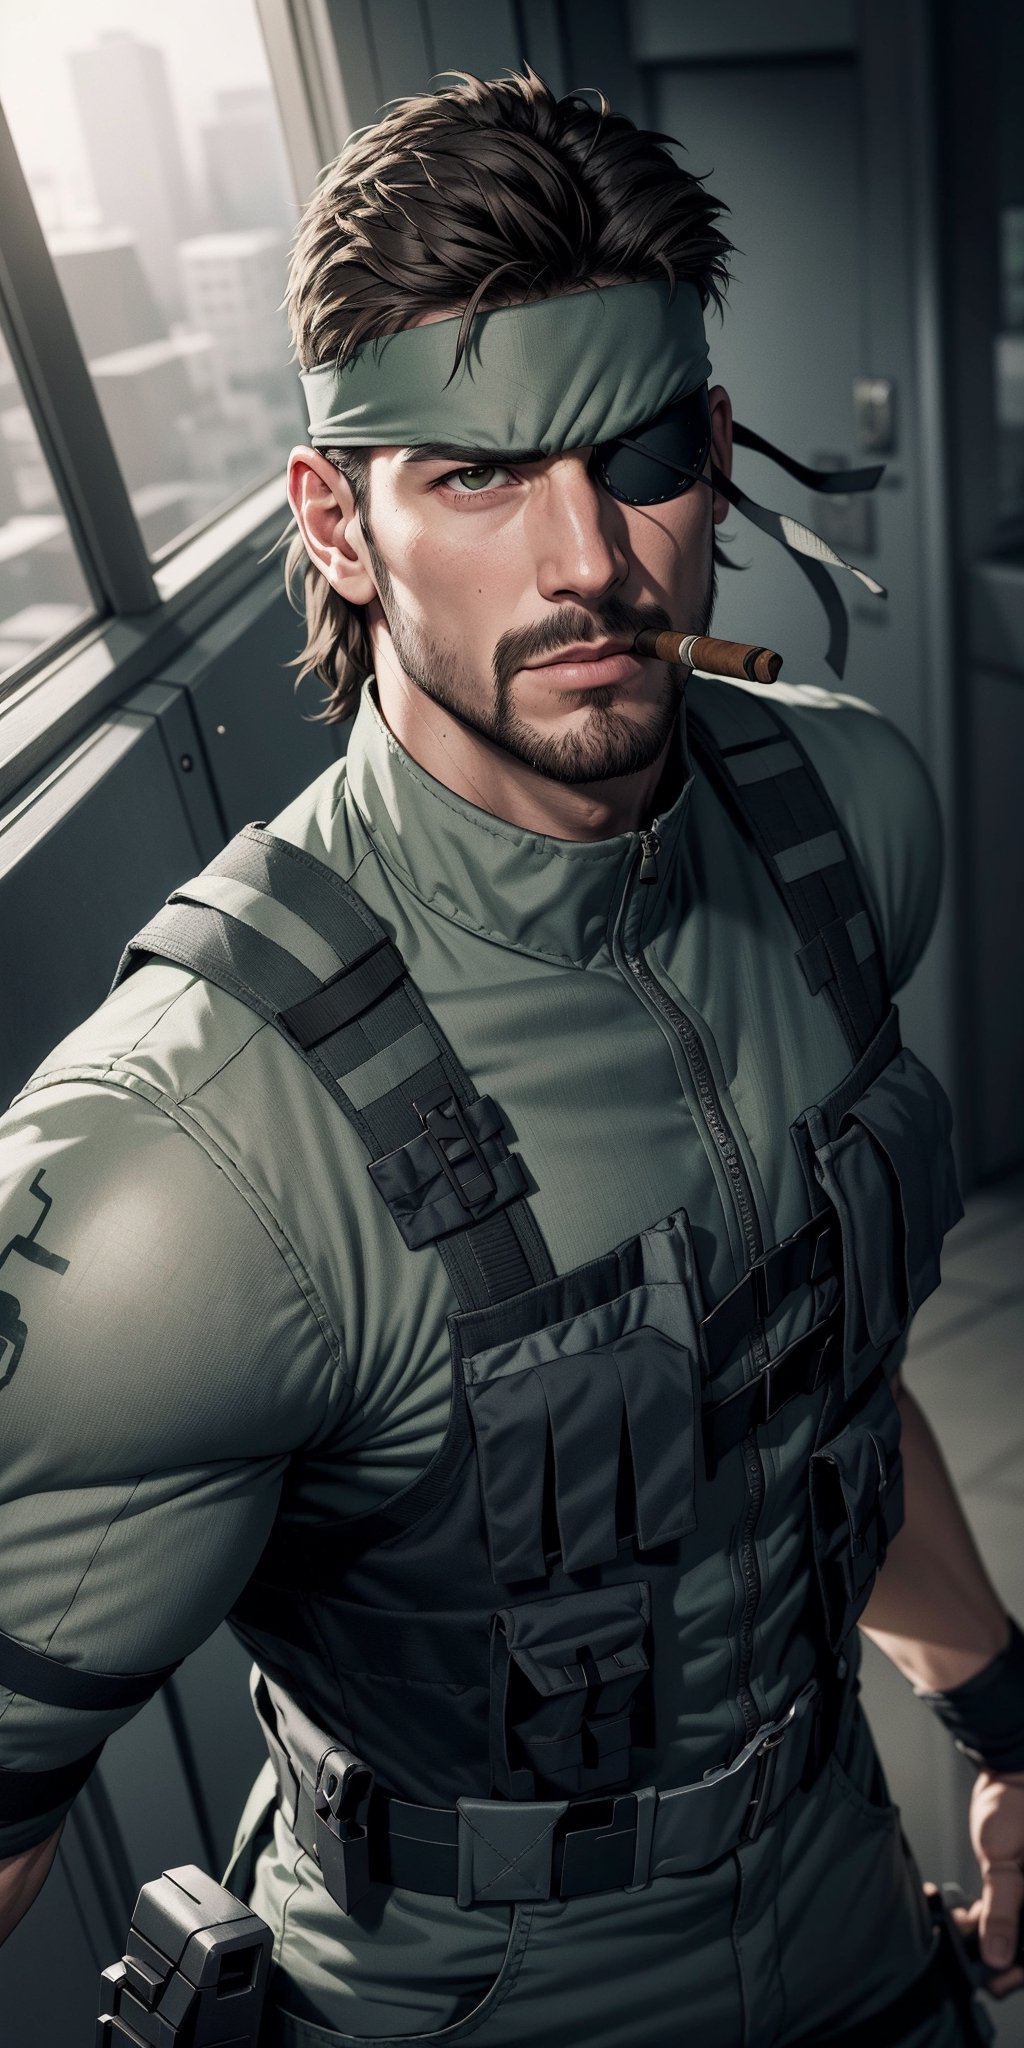 masterpiece,best quality,photo realistic, picture perfect face,eyepatch, headband,lit cigar,green camouflaug jumpsuit, bulletproof vest,solid snake, grizzled, facial hair,agressive facial expression